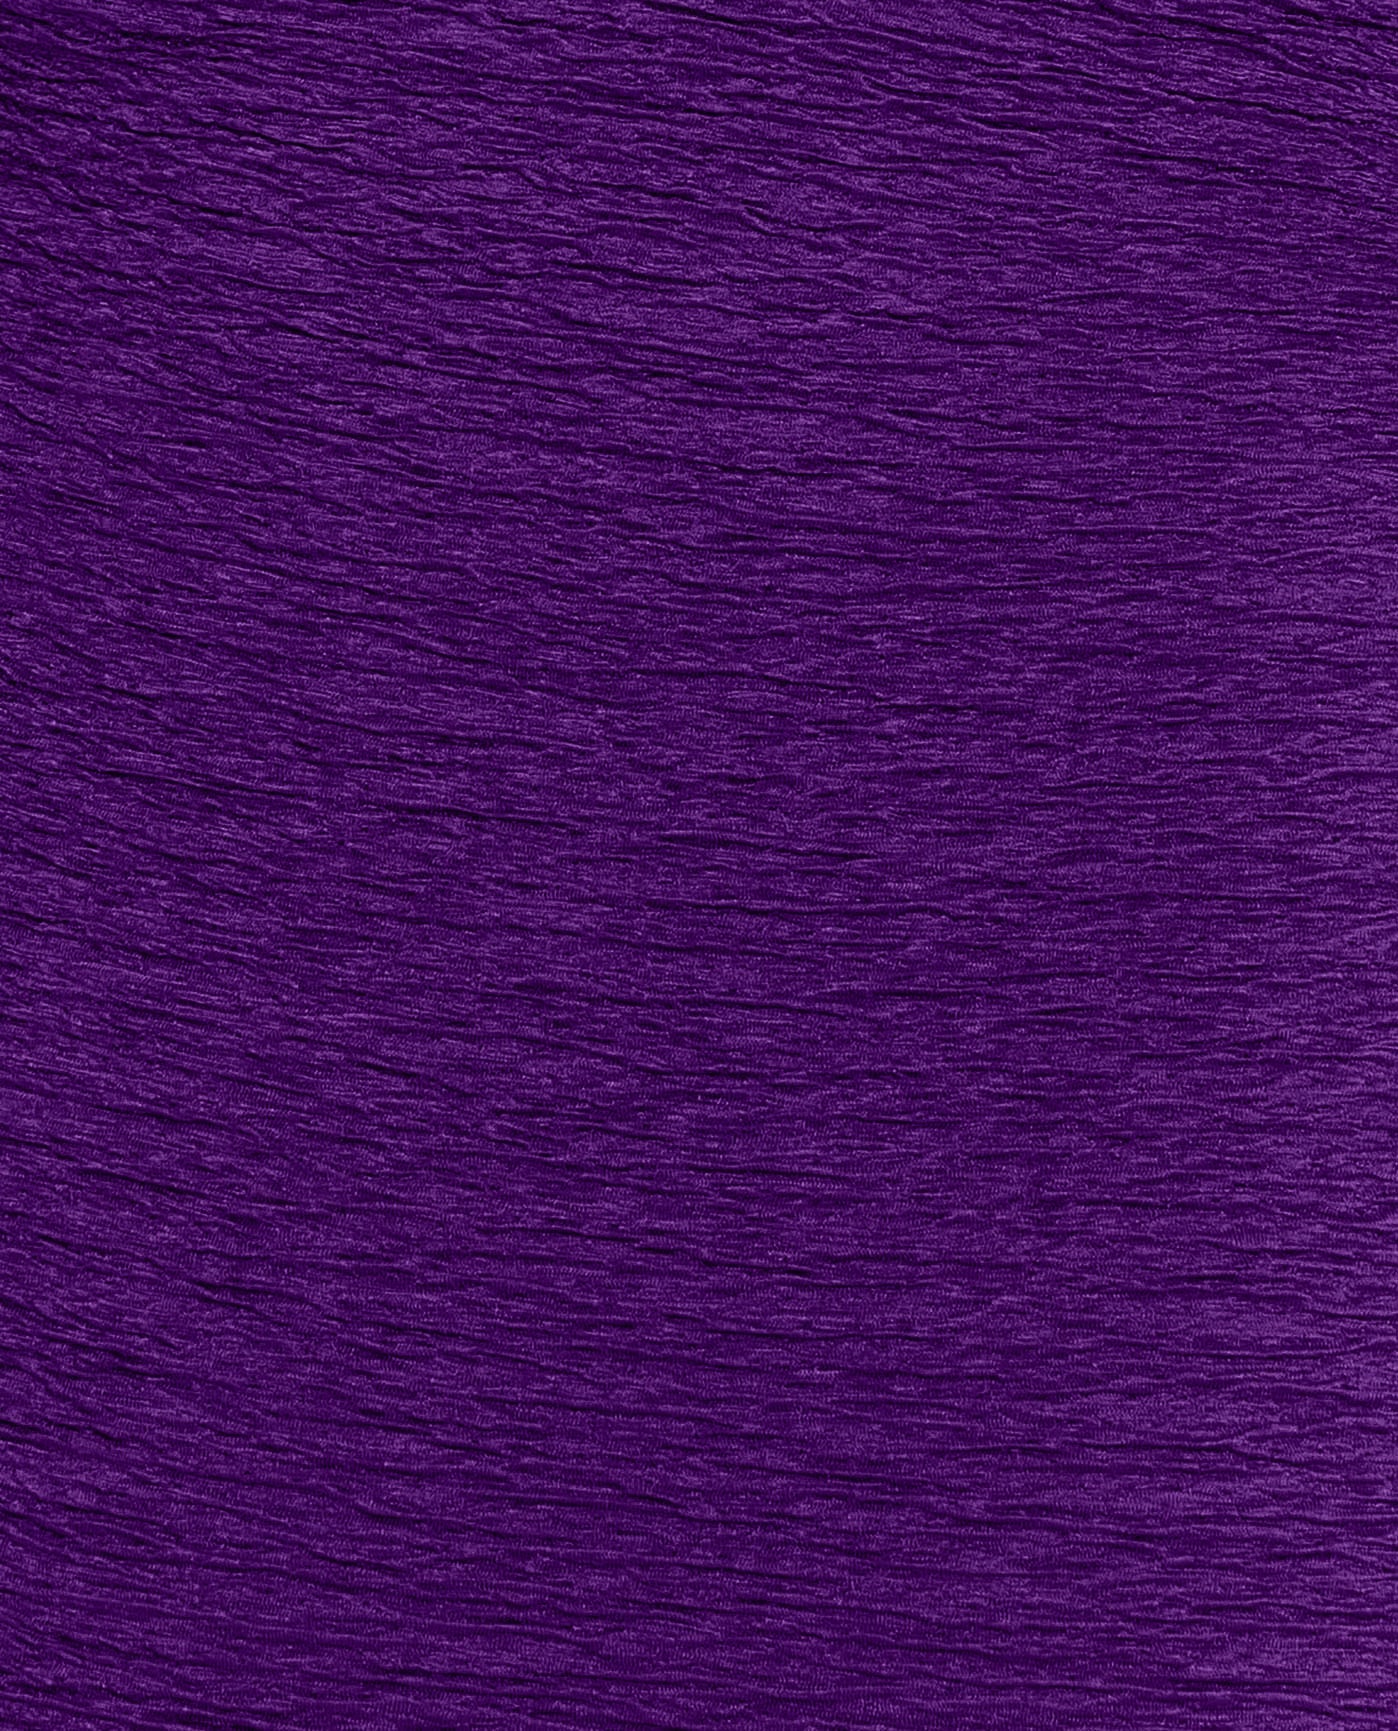 FABRIC SWATCH VIEW OF CHLORINE RESISTANT KRINKLE TEXTURED SOLID CROSS BACK D-CUP ONE PIECE | KRINKLE ACAI PURPLE